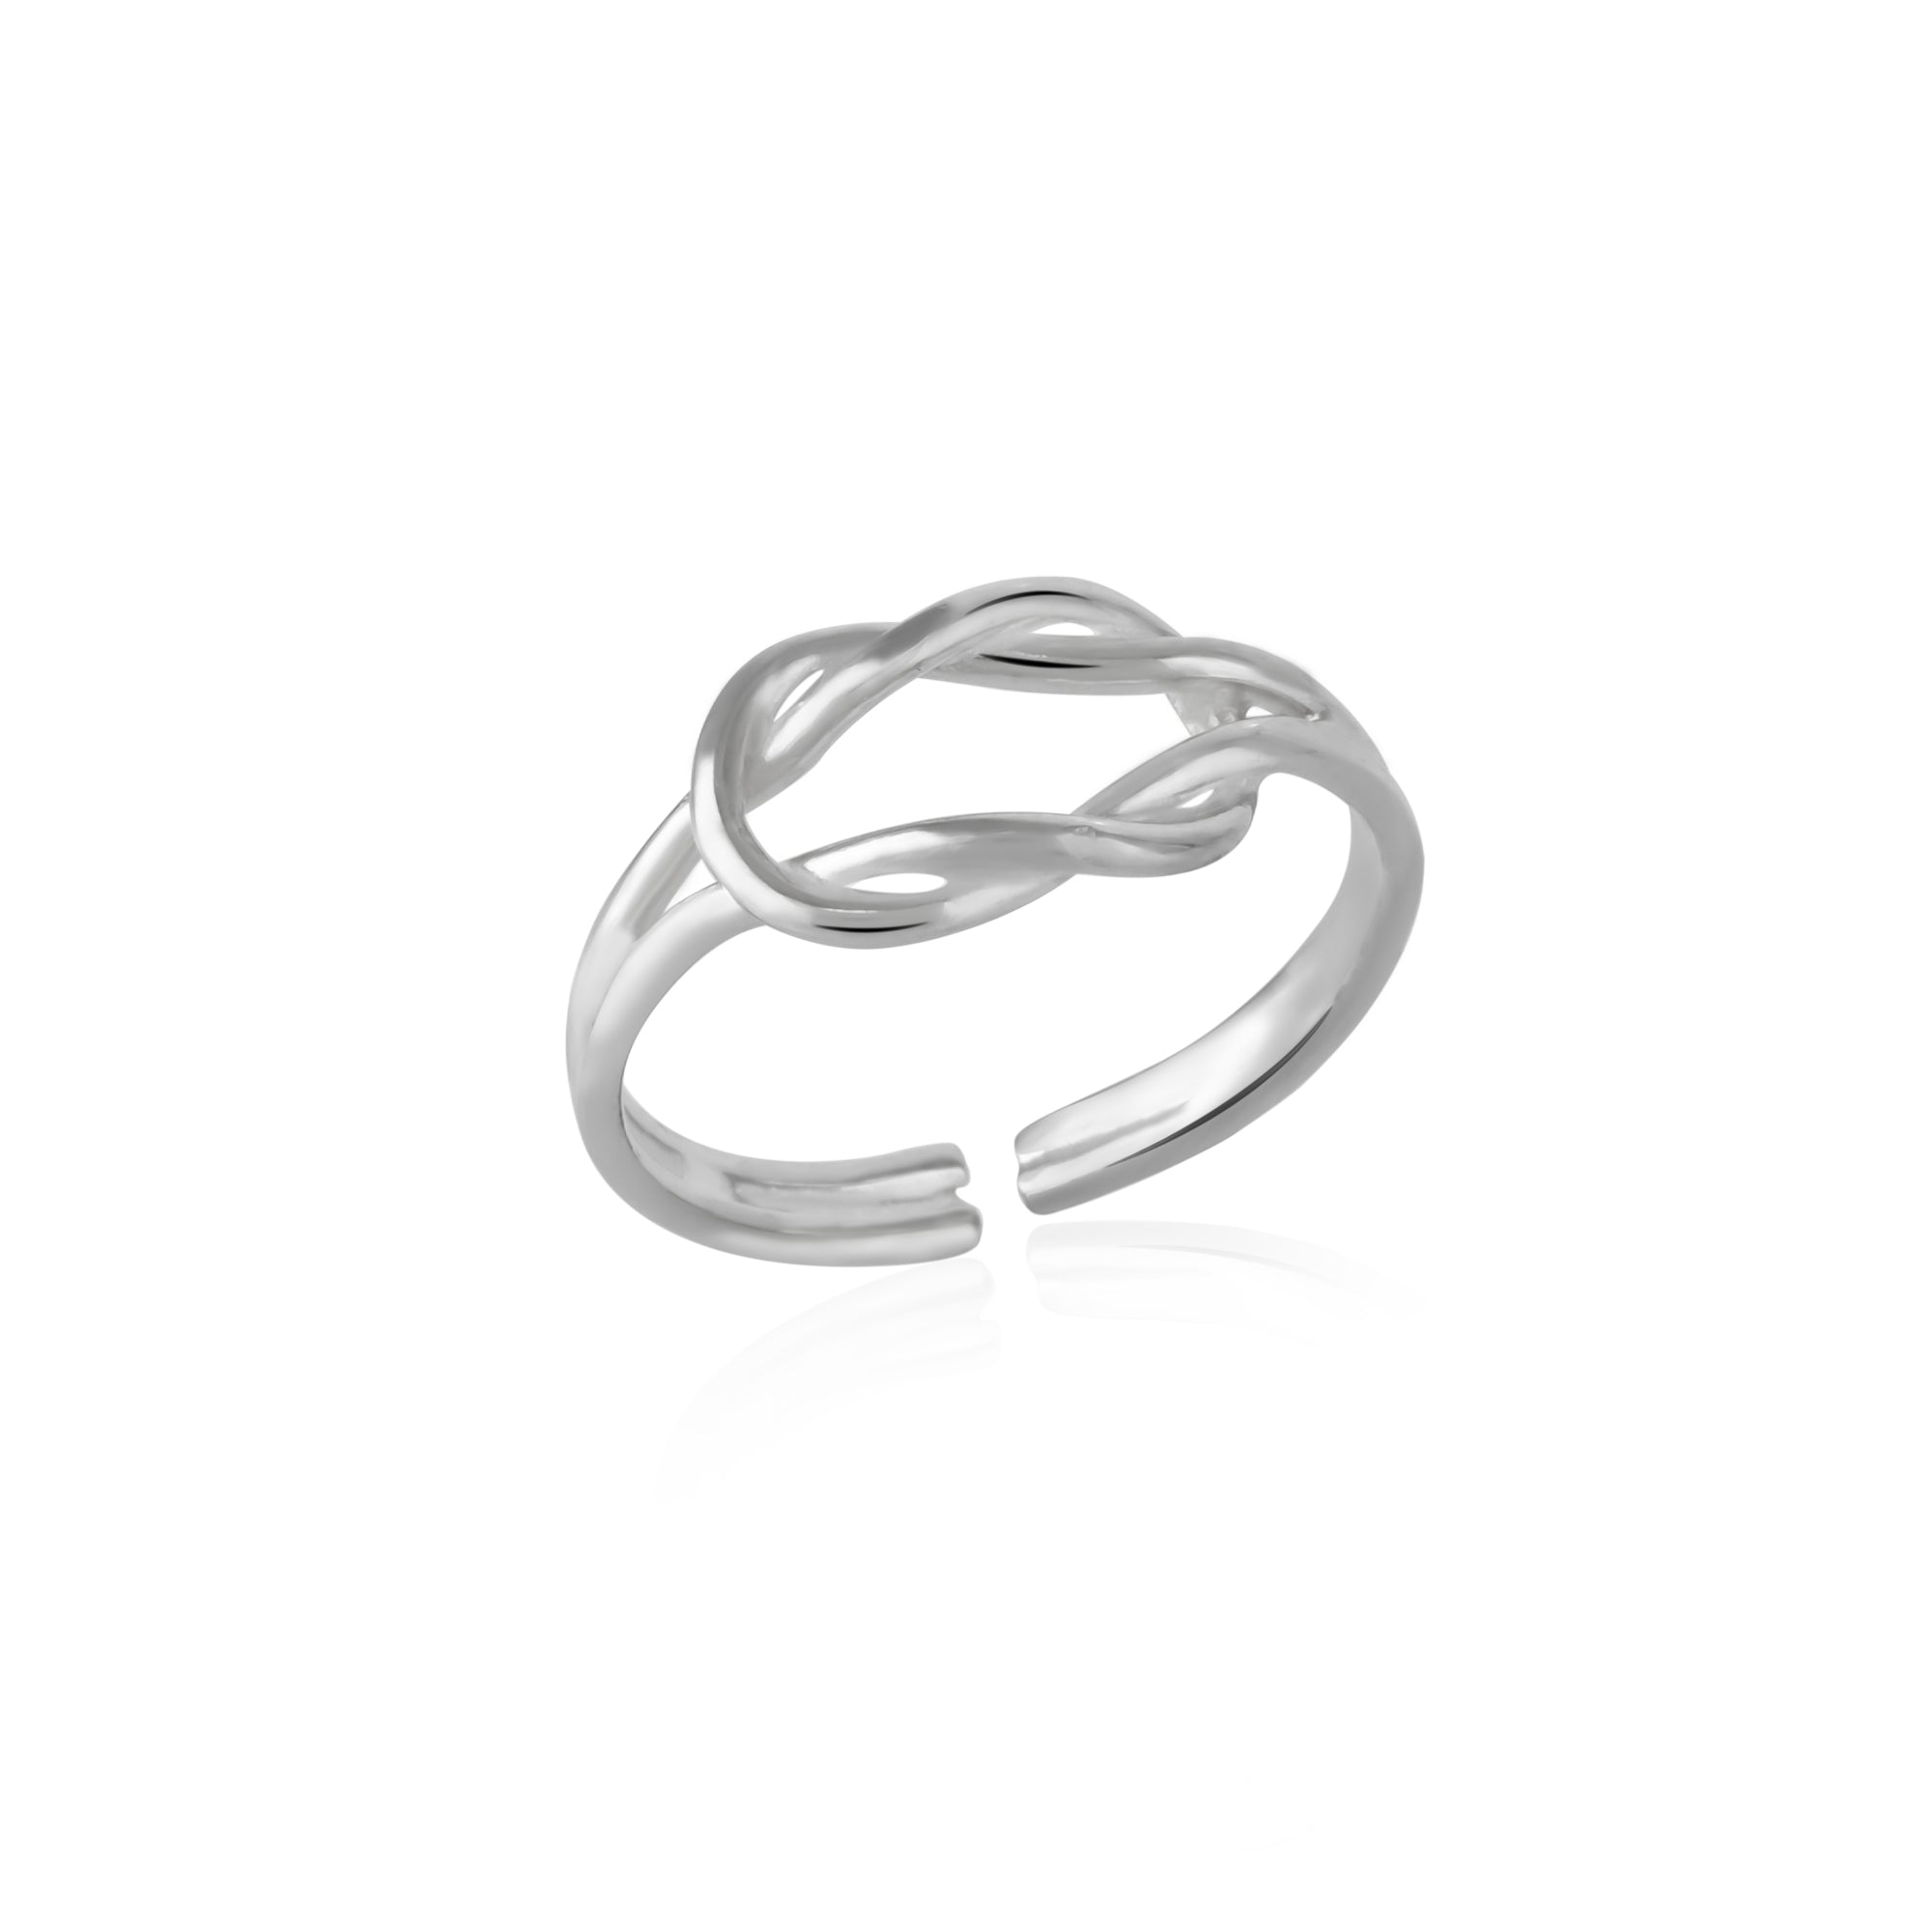 Knot Sterling Silver Adjustable Ring